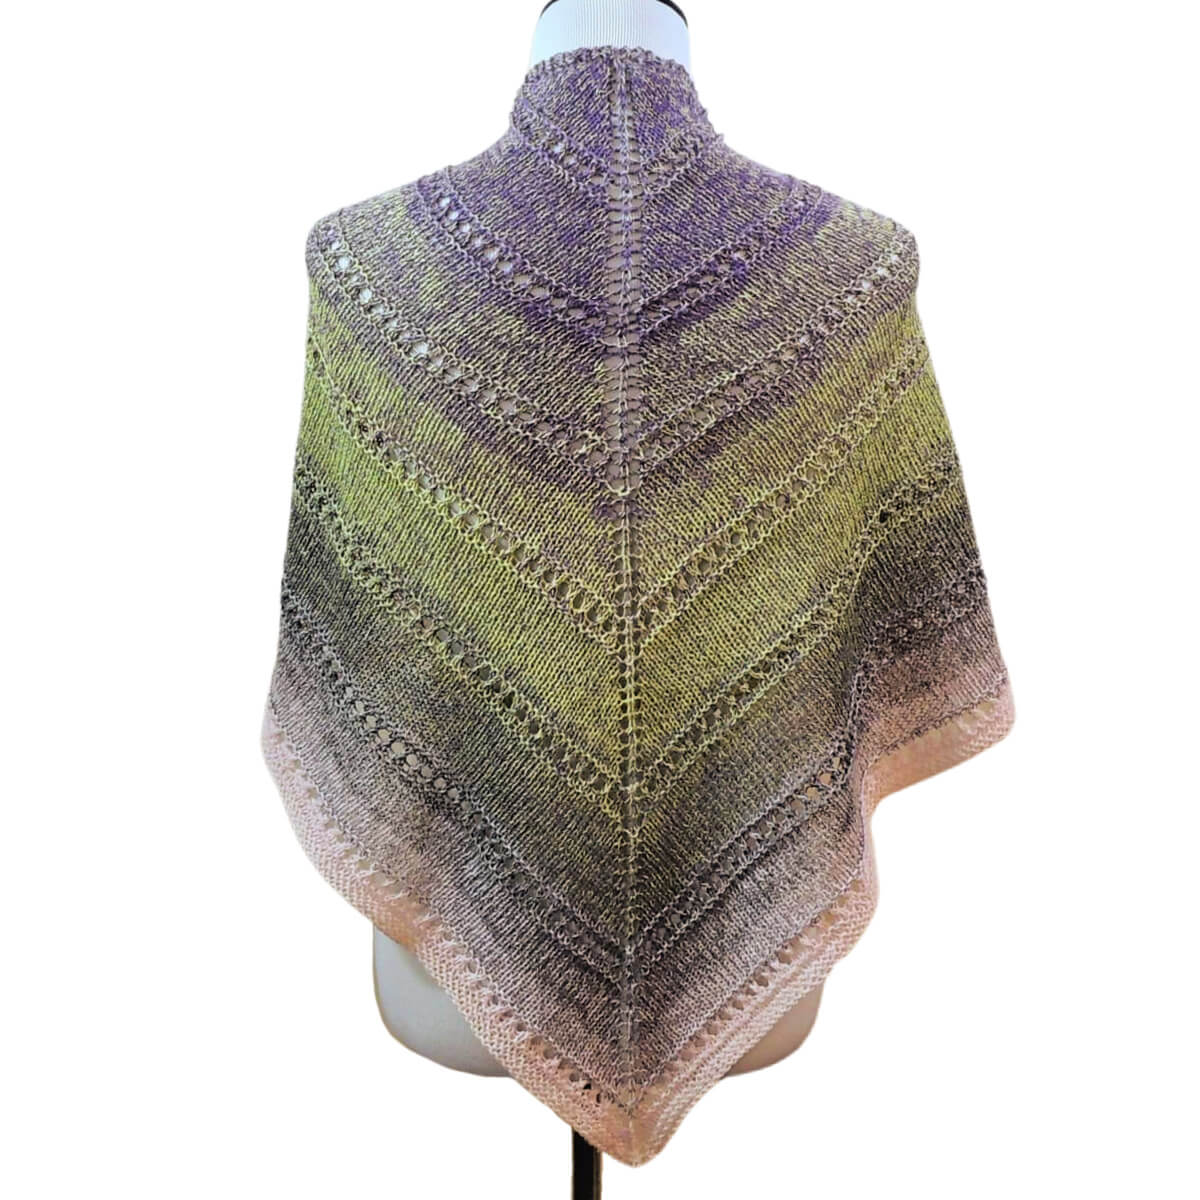 Back of the torso of a dress form wearing a triangular knitted shawl in stockinette stitch with a stripe of eyelet stitches every few inches, and changing colors slowly from gray to green to gray to pink. The point of the shawl hangs in the front and the sides are draped over the shoulders.